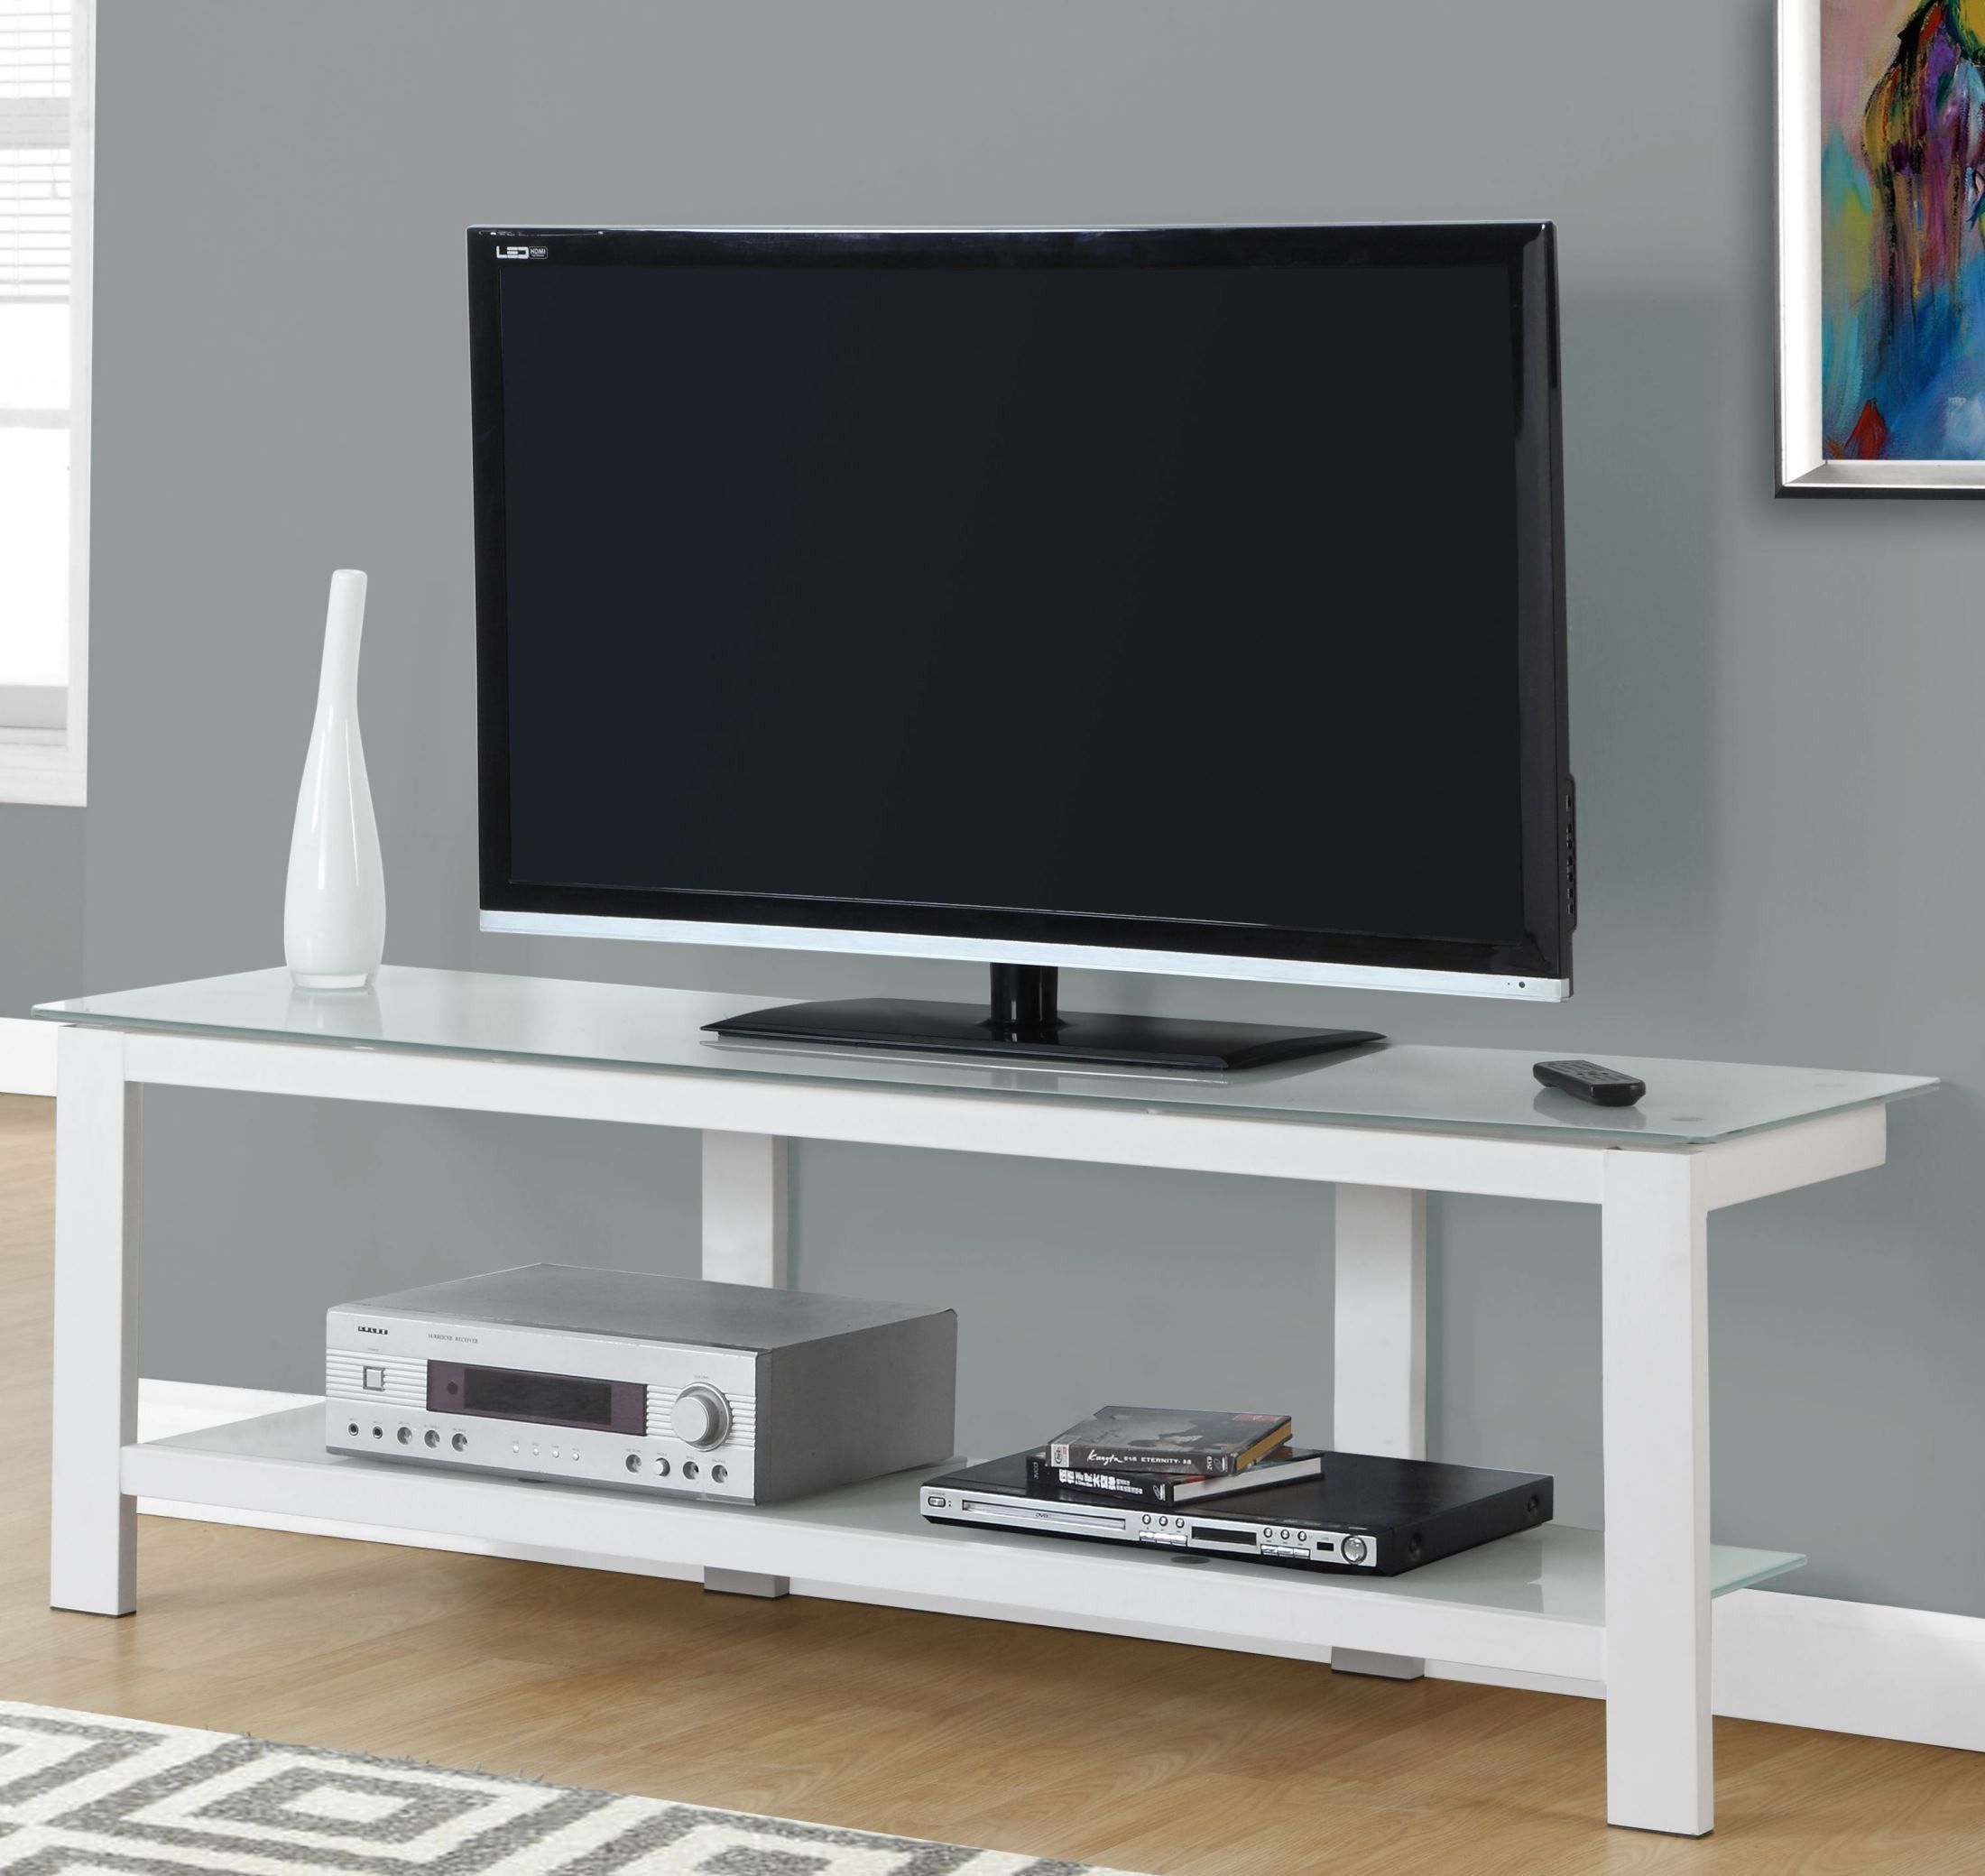 White Frosted Tempered Glass 60" Tv Stand From Monarch Within Glass Shelves Tv Stands (View 8 of 15)